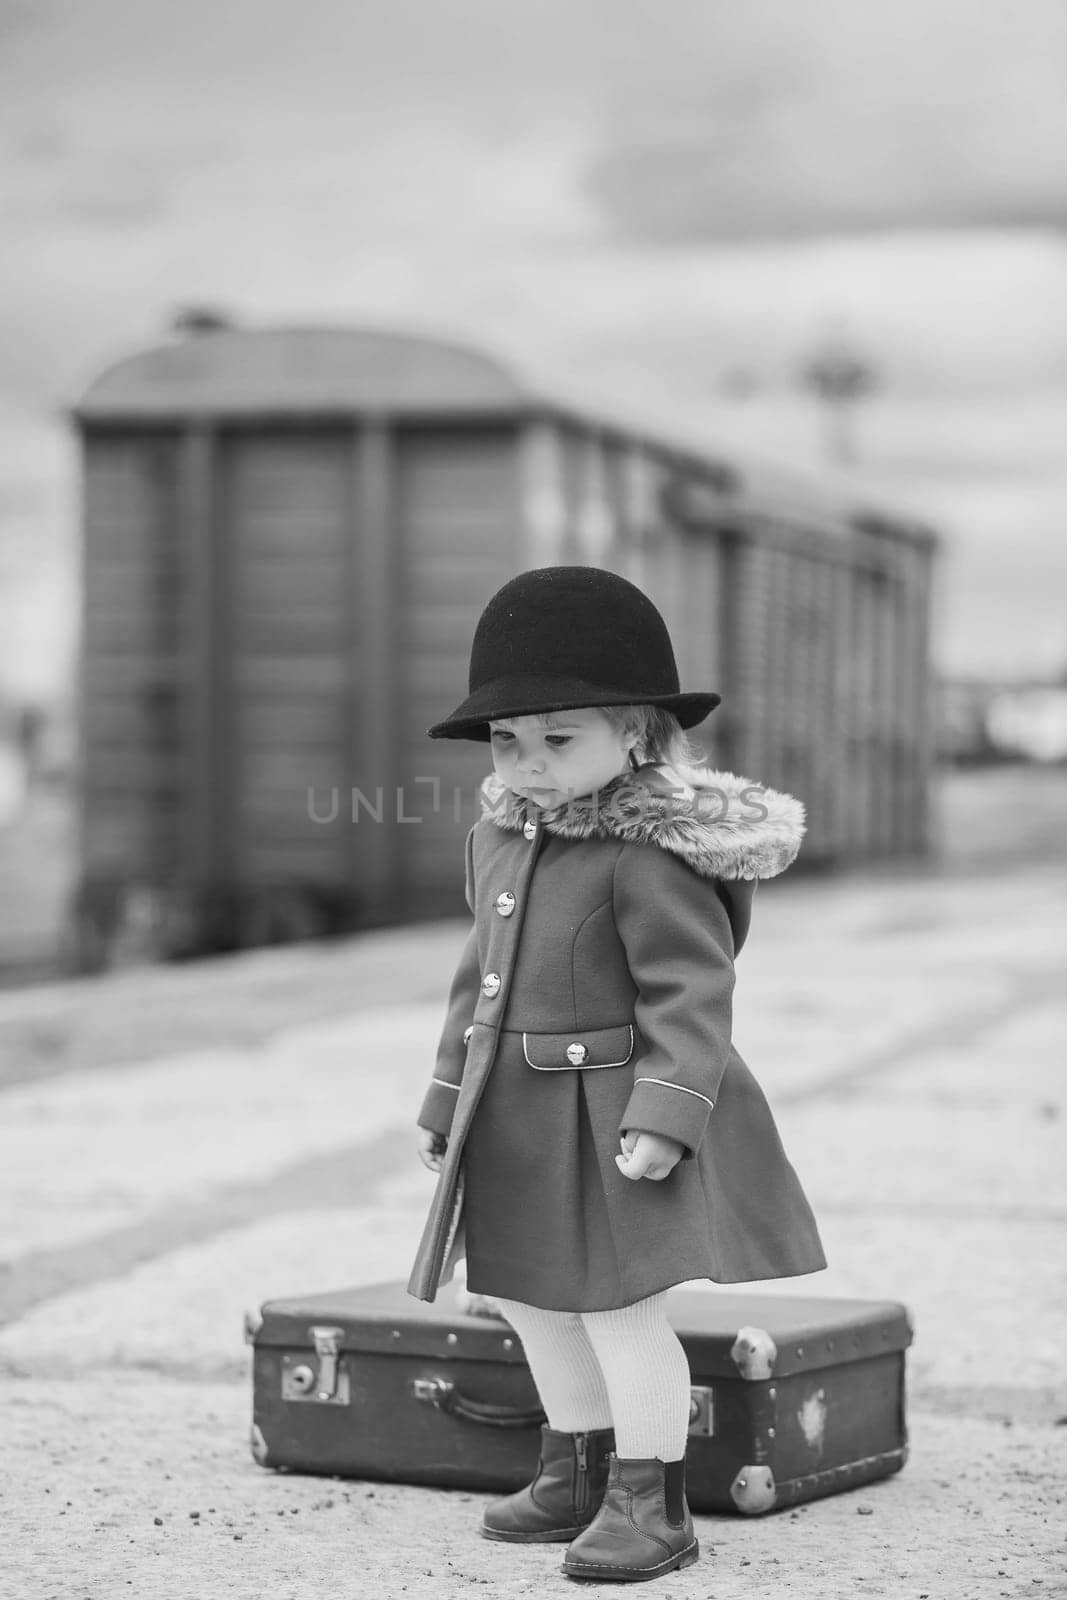 Retro photo of a baby girl who is waiting for a train by Viktor_Osypenko